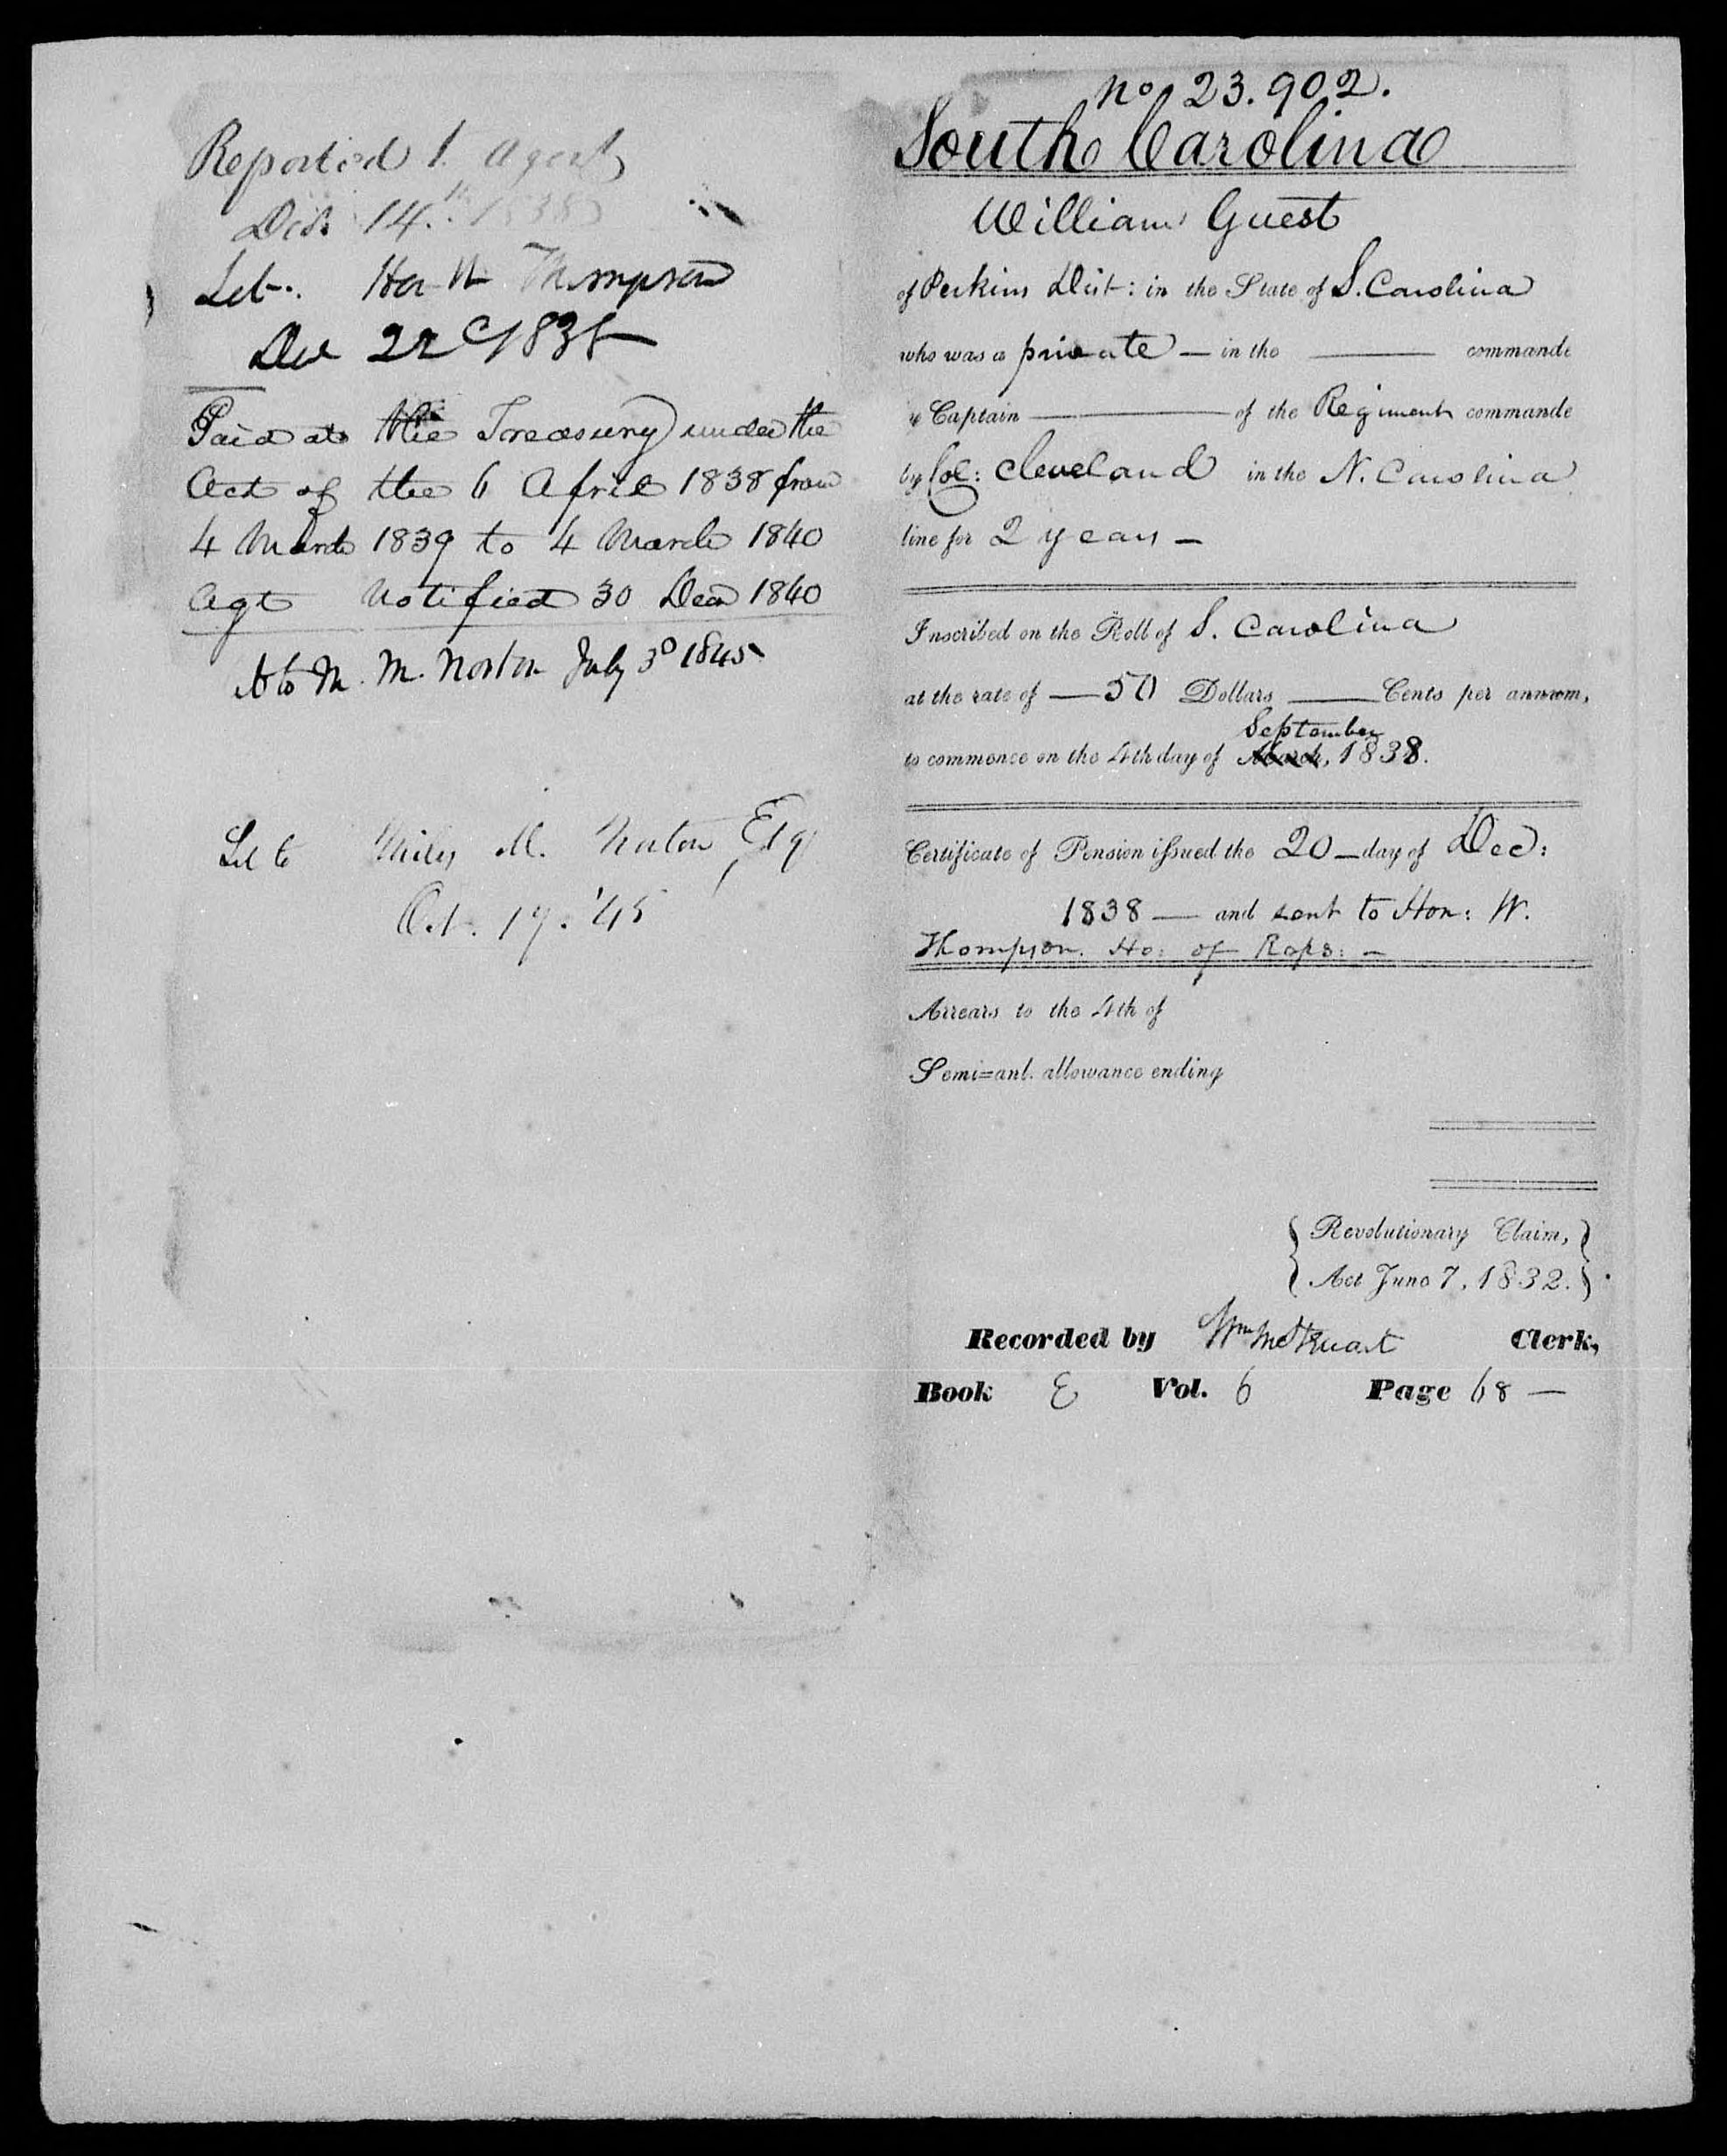 Docket for Pension from the U.S. Pension Office for William Guest, 20 December 1838